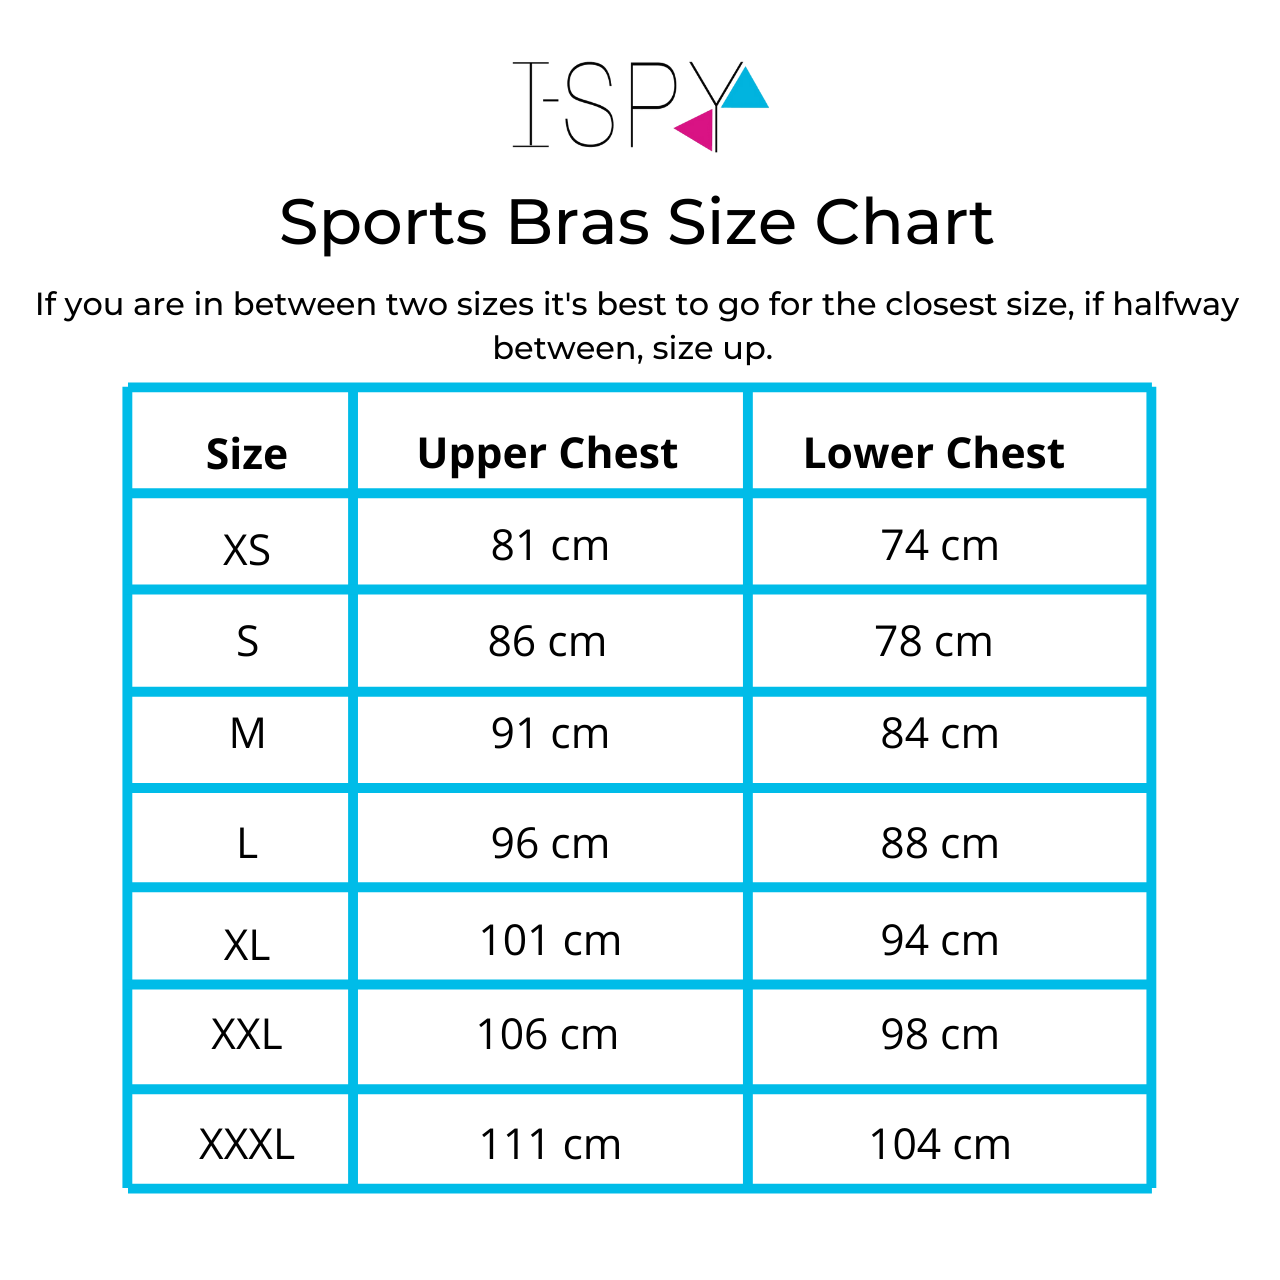 https://i-spy.ie/wp-content/uploads/2020/12/Sports-Bras-Size-Chart-Updated.png